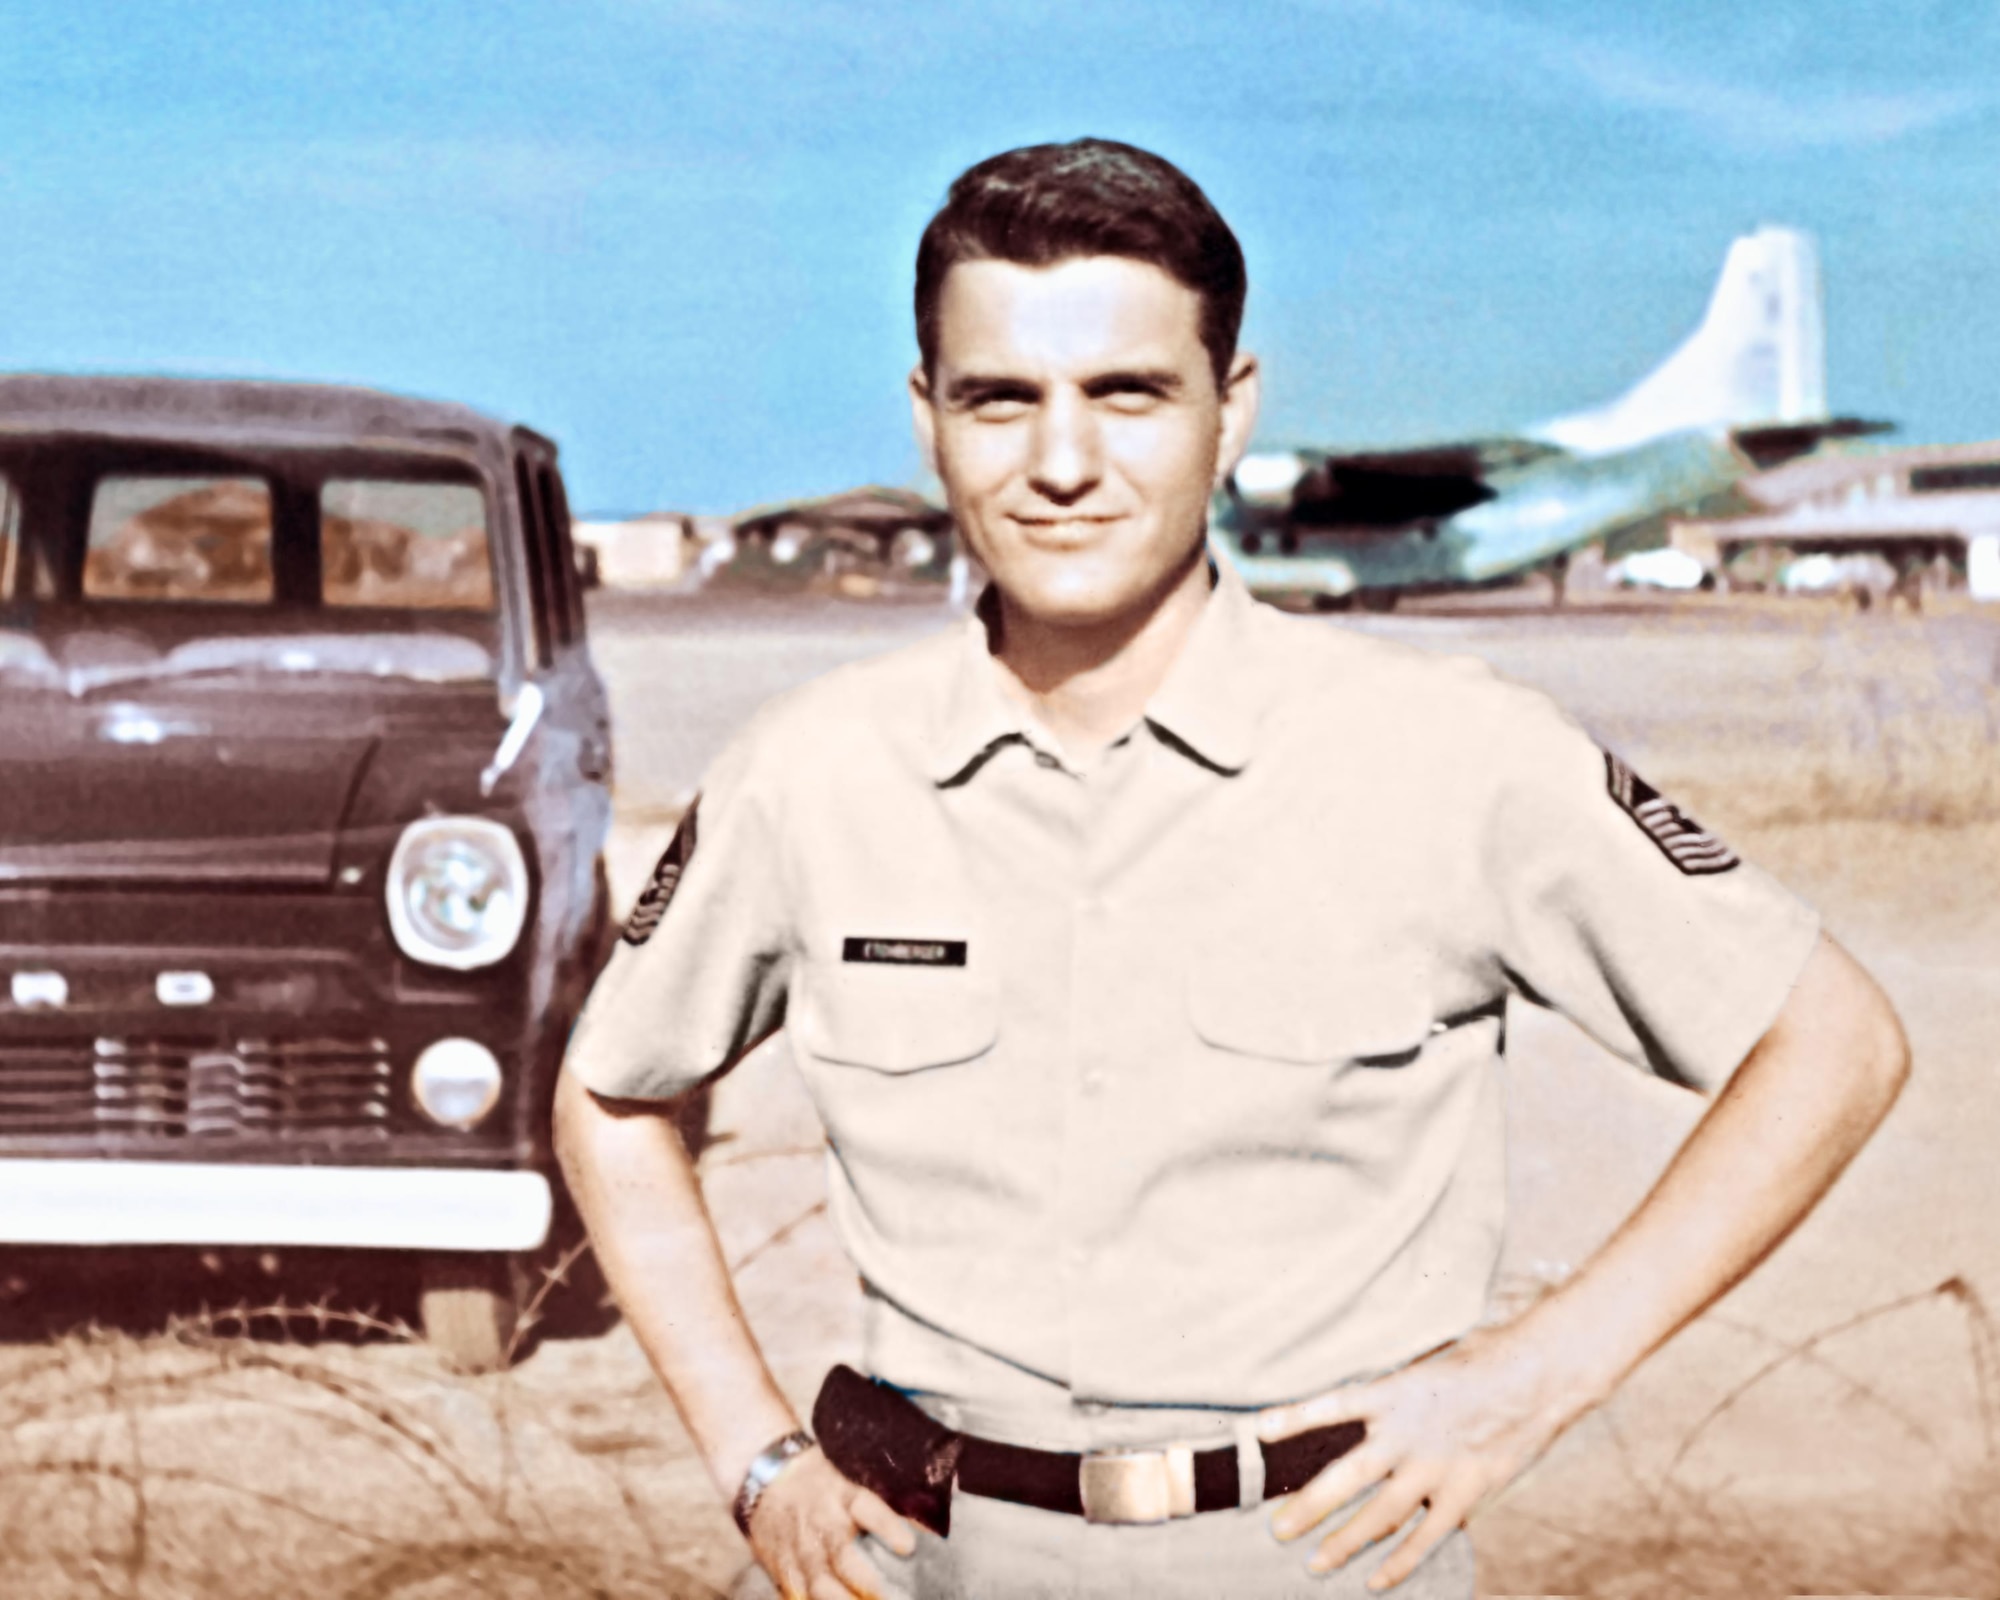 Medal of Honor recipient Chief Master Sgt. Richard L. Etchberger at Udorn Air Base, Thailand, shortly before his death in March 1968 during a battle at a secret U.S. radar site on a mountain peak in Laos. (Courtesy photo)